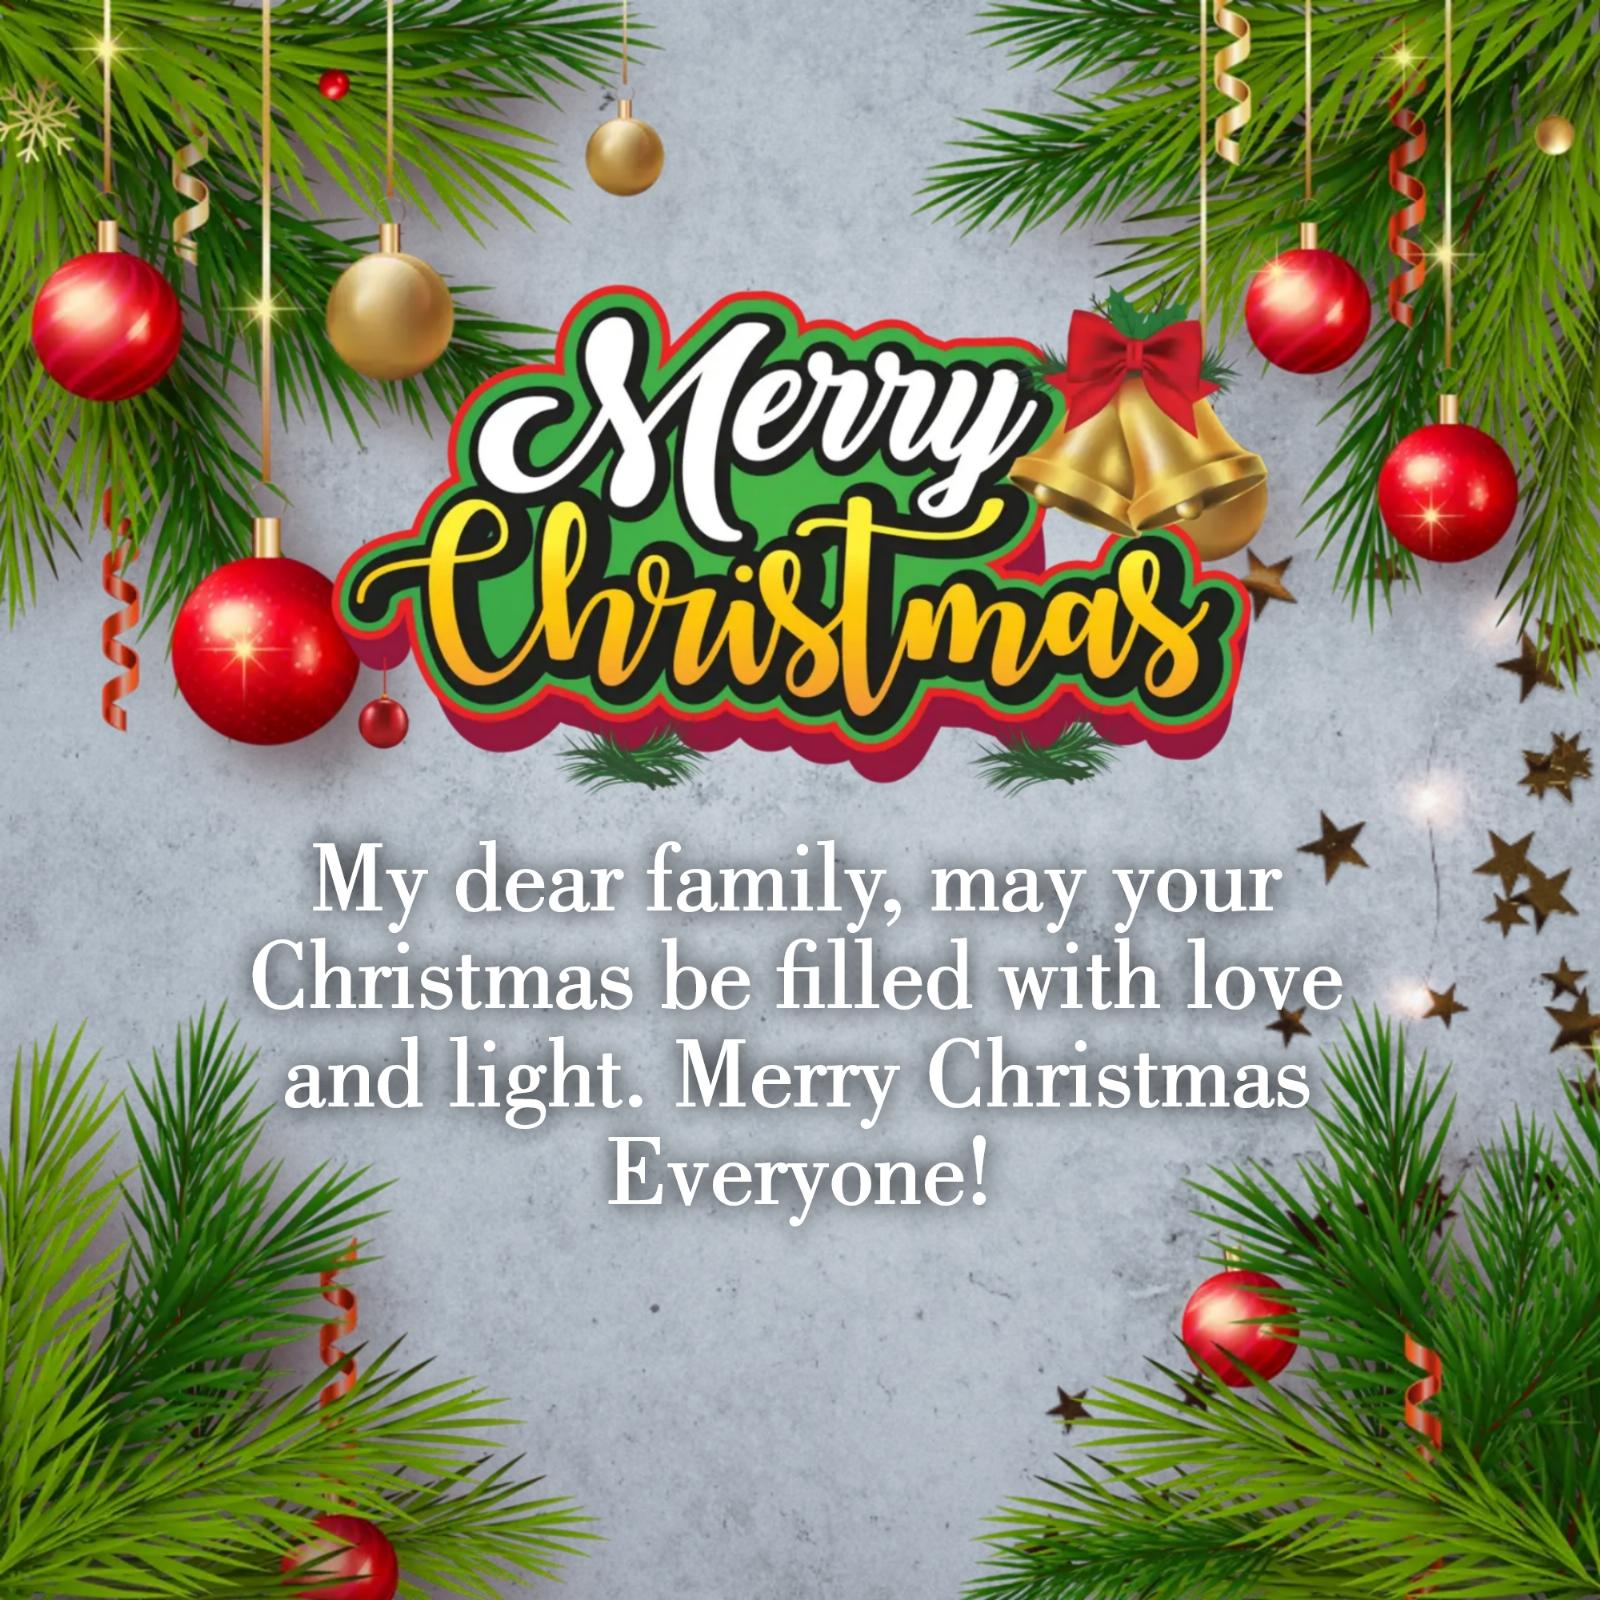 My dear family may your Christmas be filled with